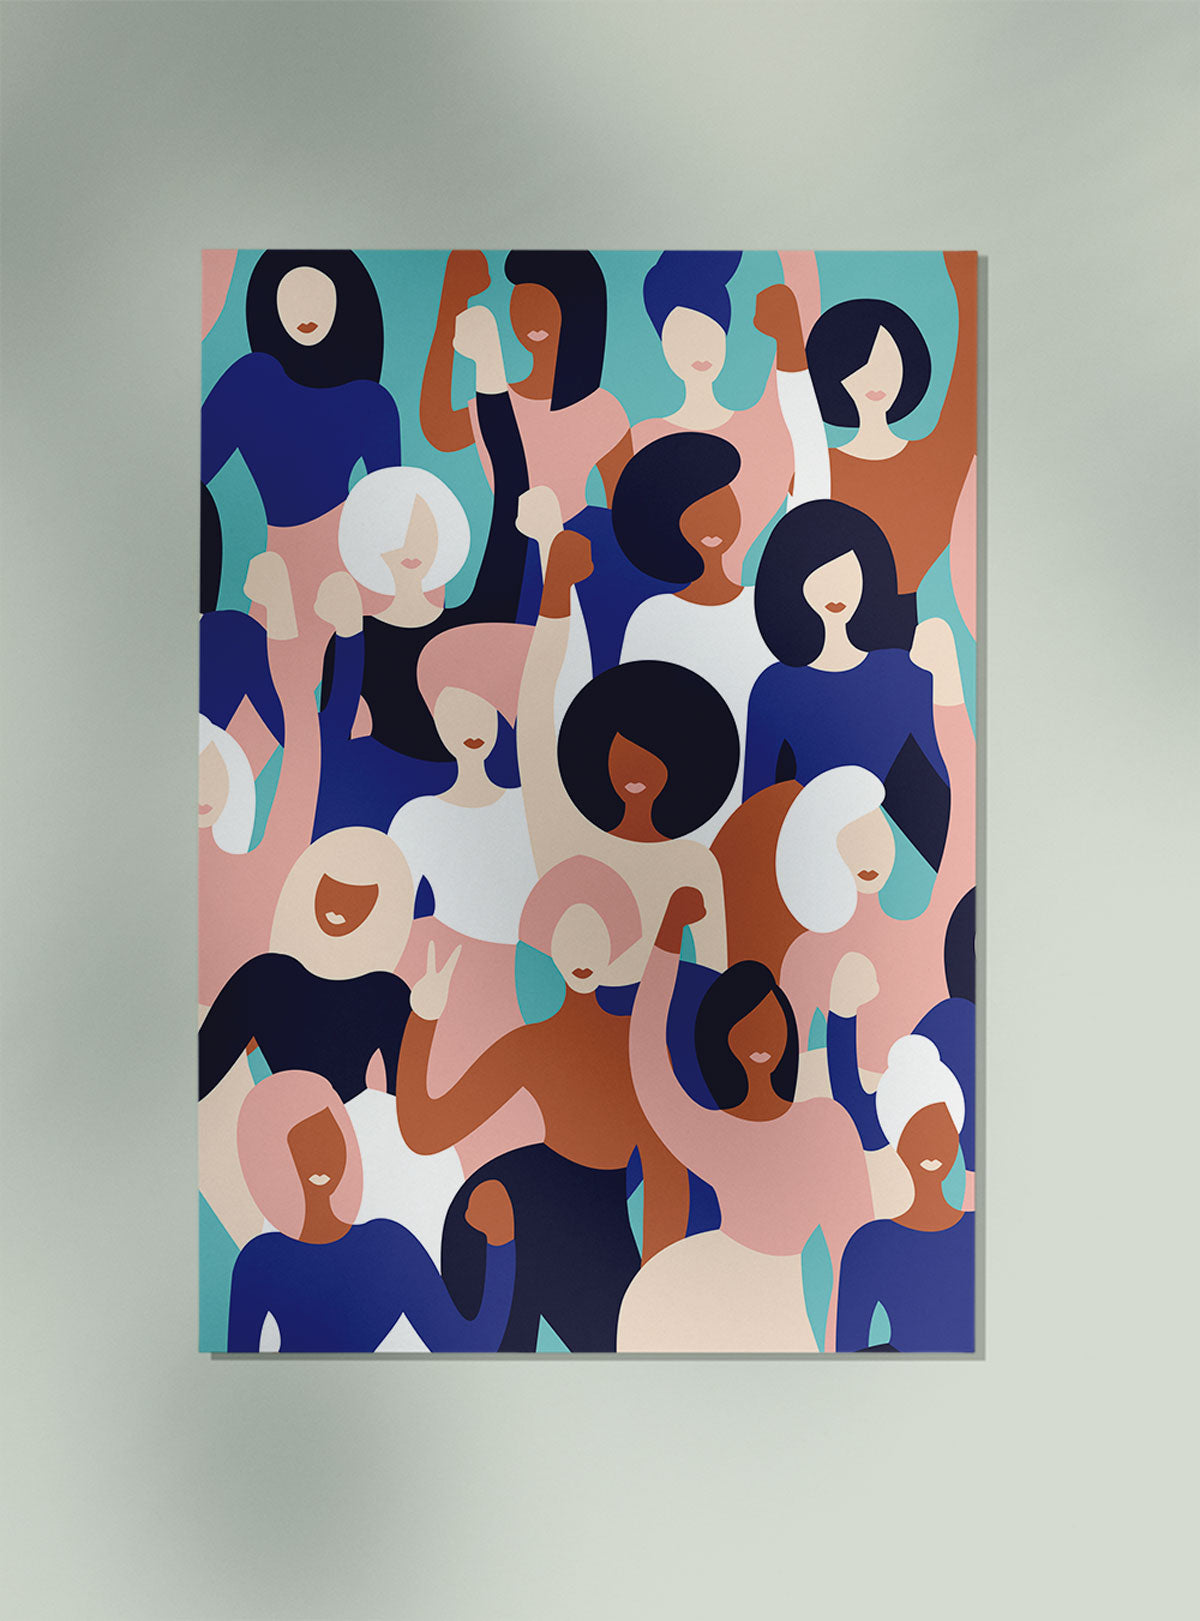 Women's Day is Everyday Art Print by Sofia Doudine